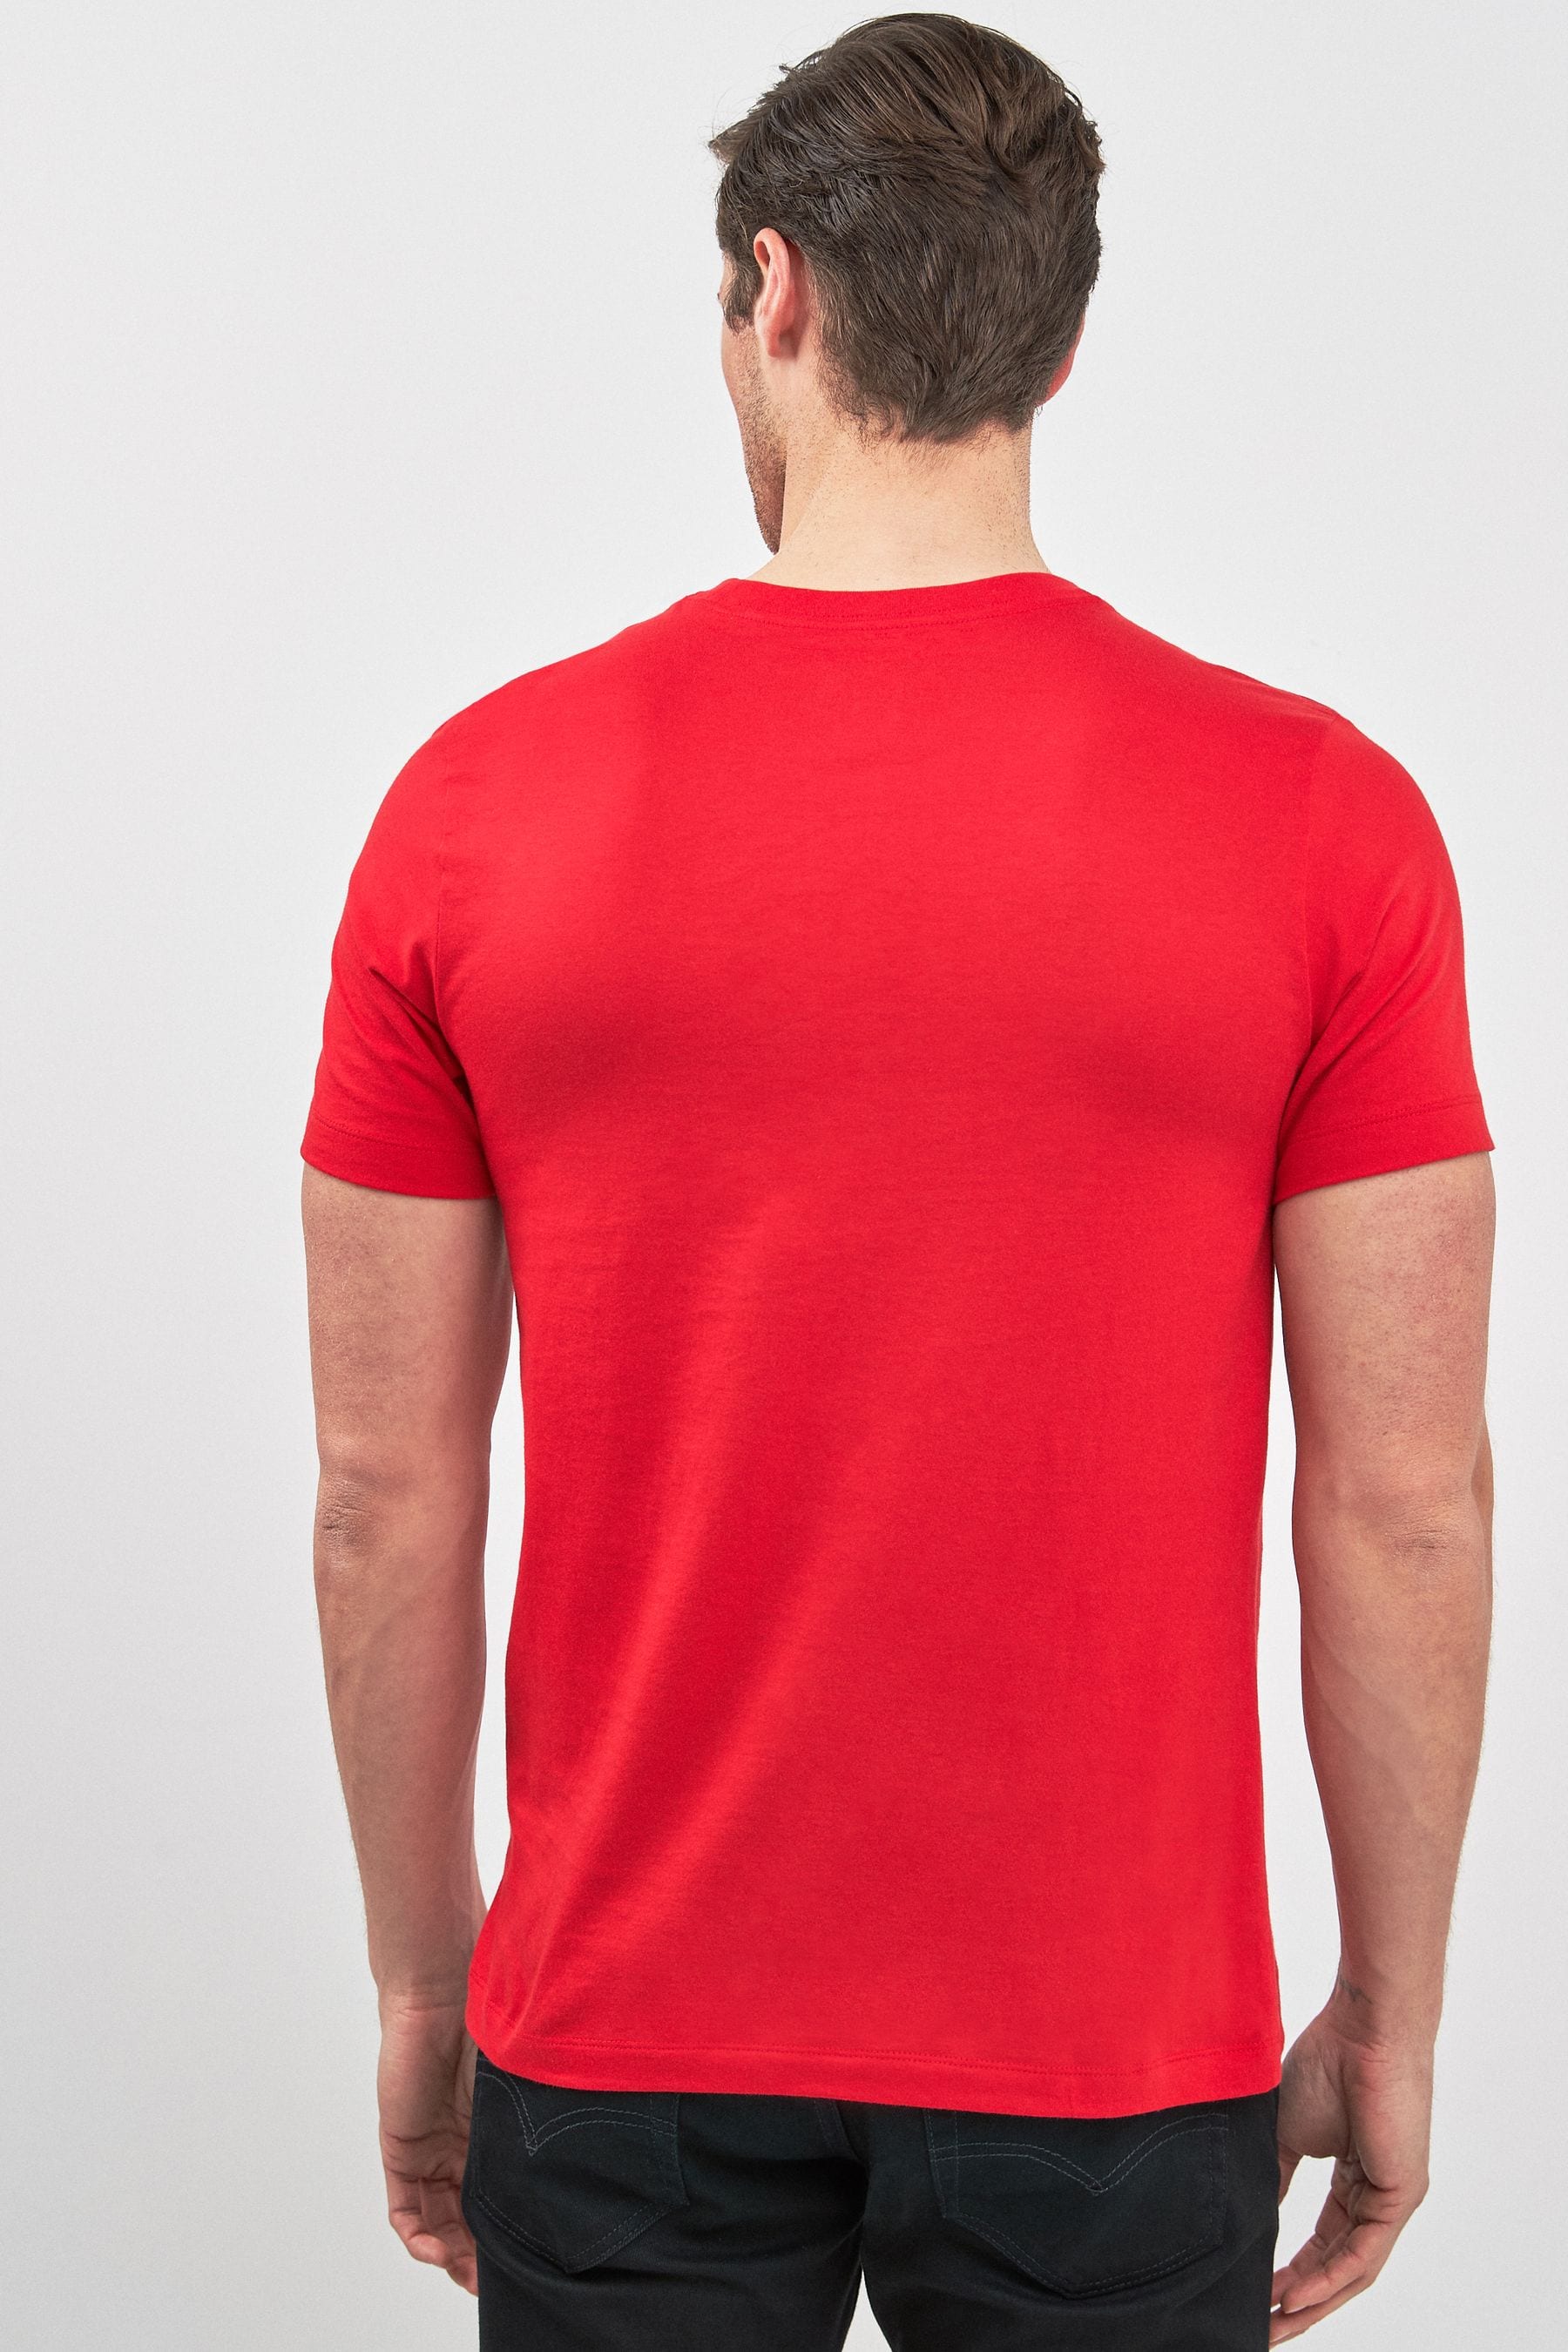 Buy Nike Red Club T-Shirt from the Next UK online shop